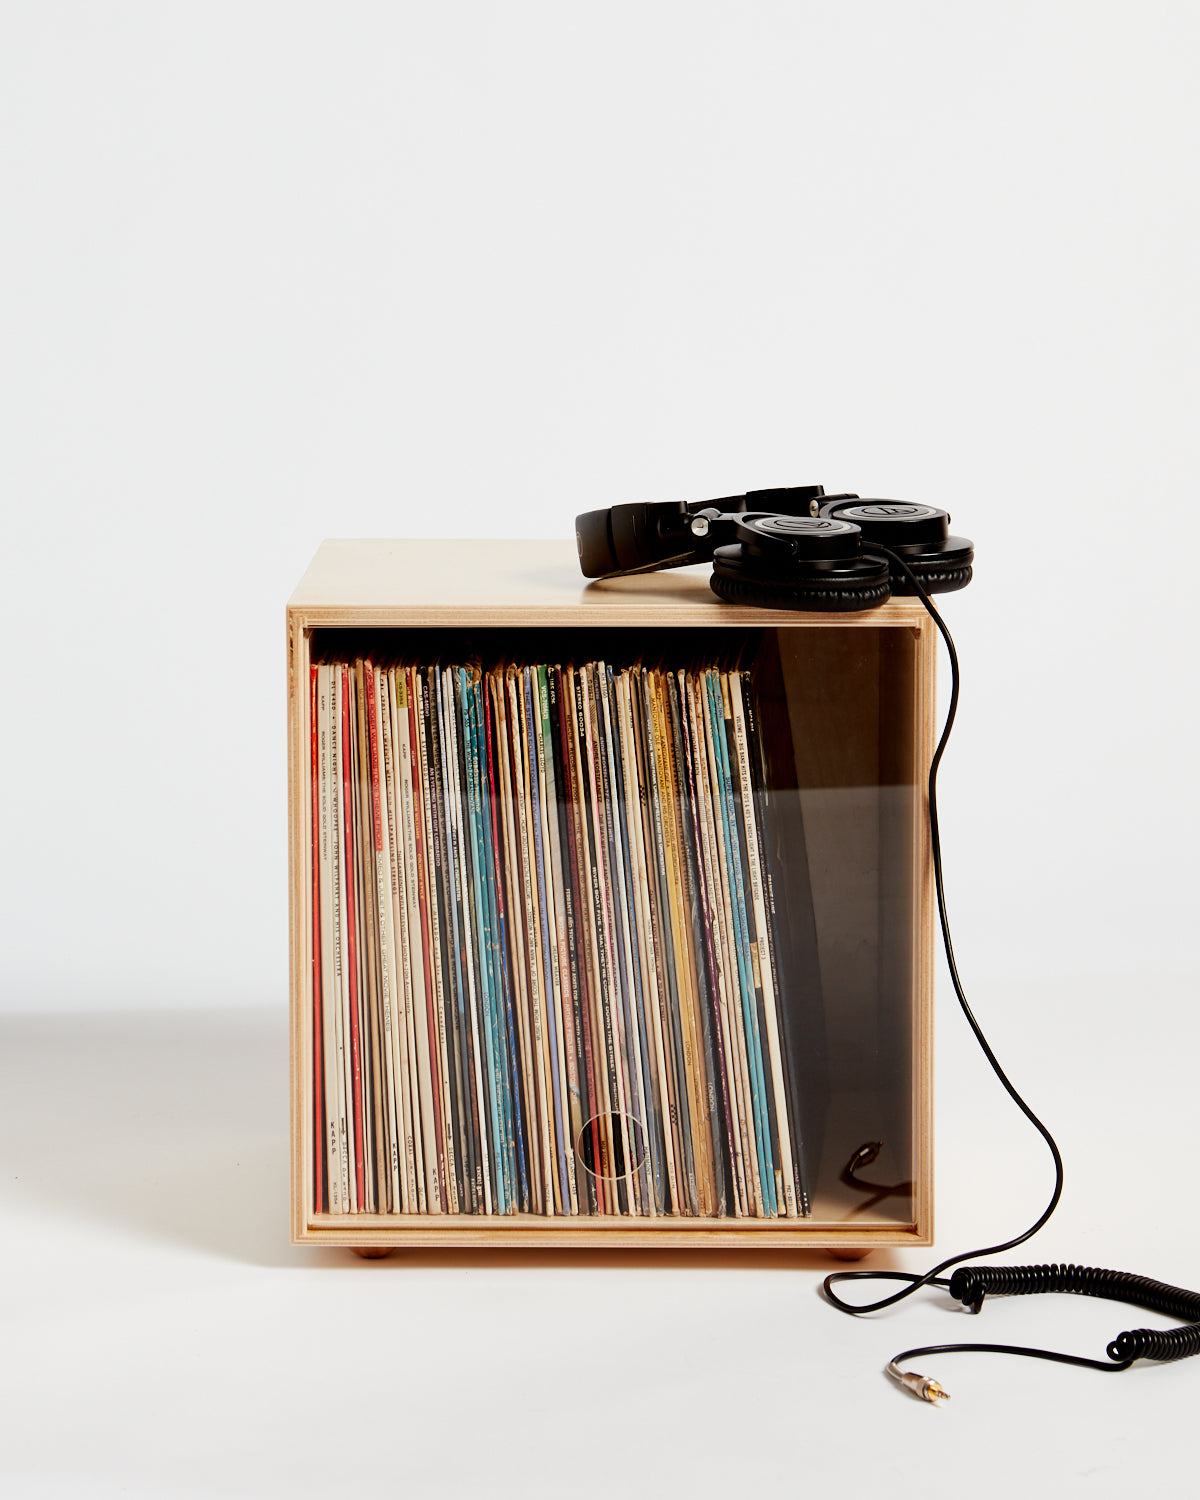 A stackable wooden storage cube for vinyl records